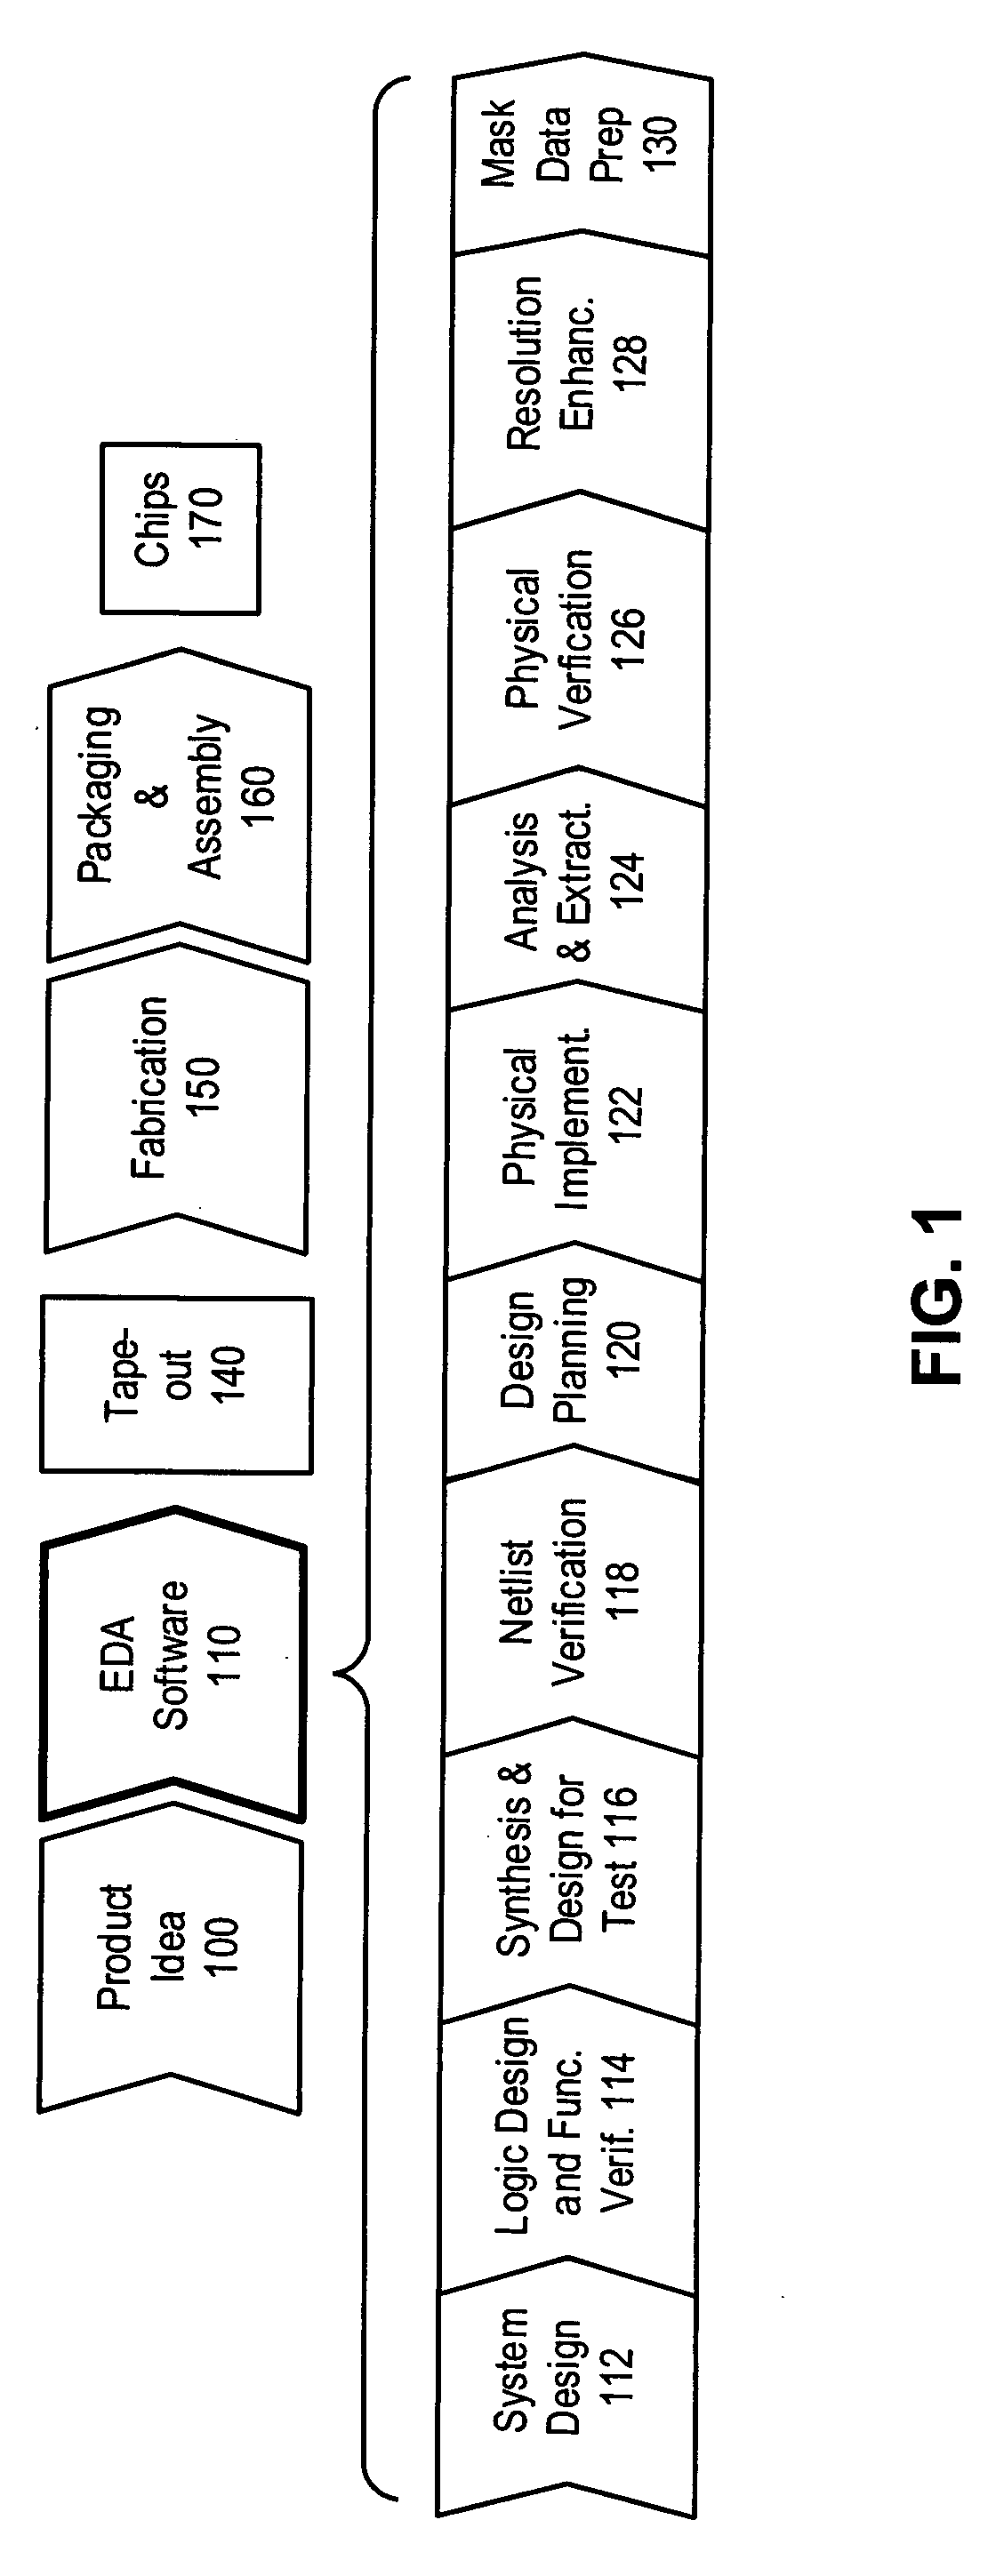 Method and apparatus for determining mask layouts for a multiple patterning process